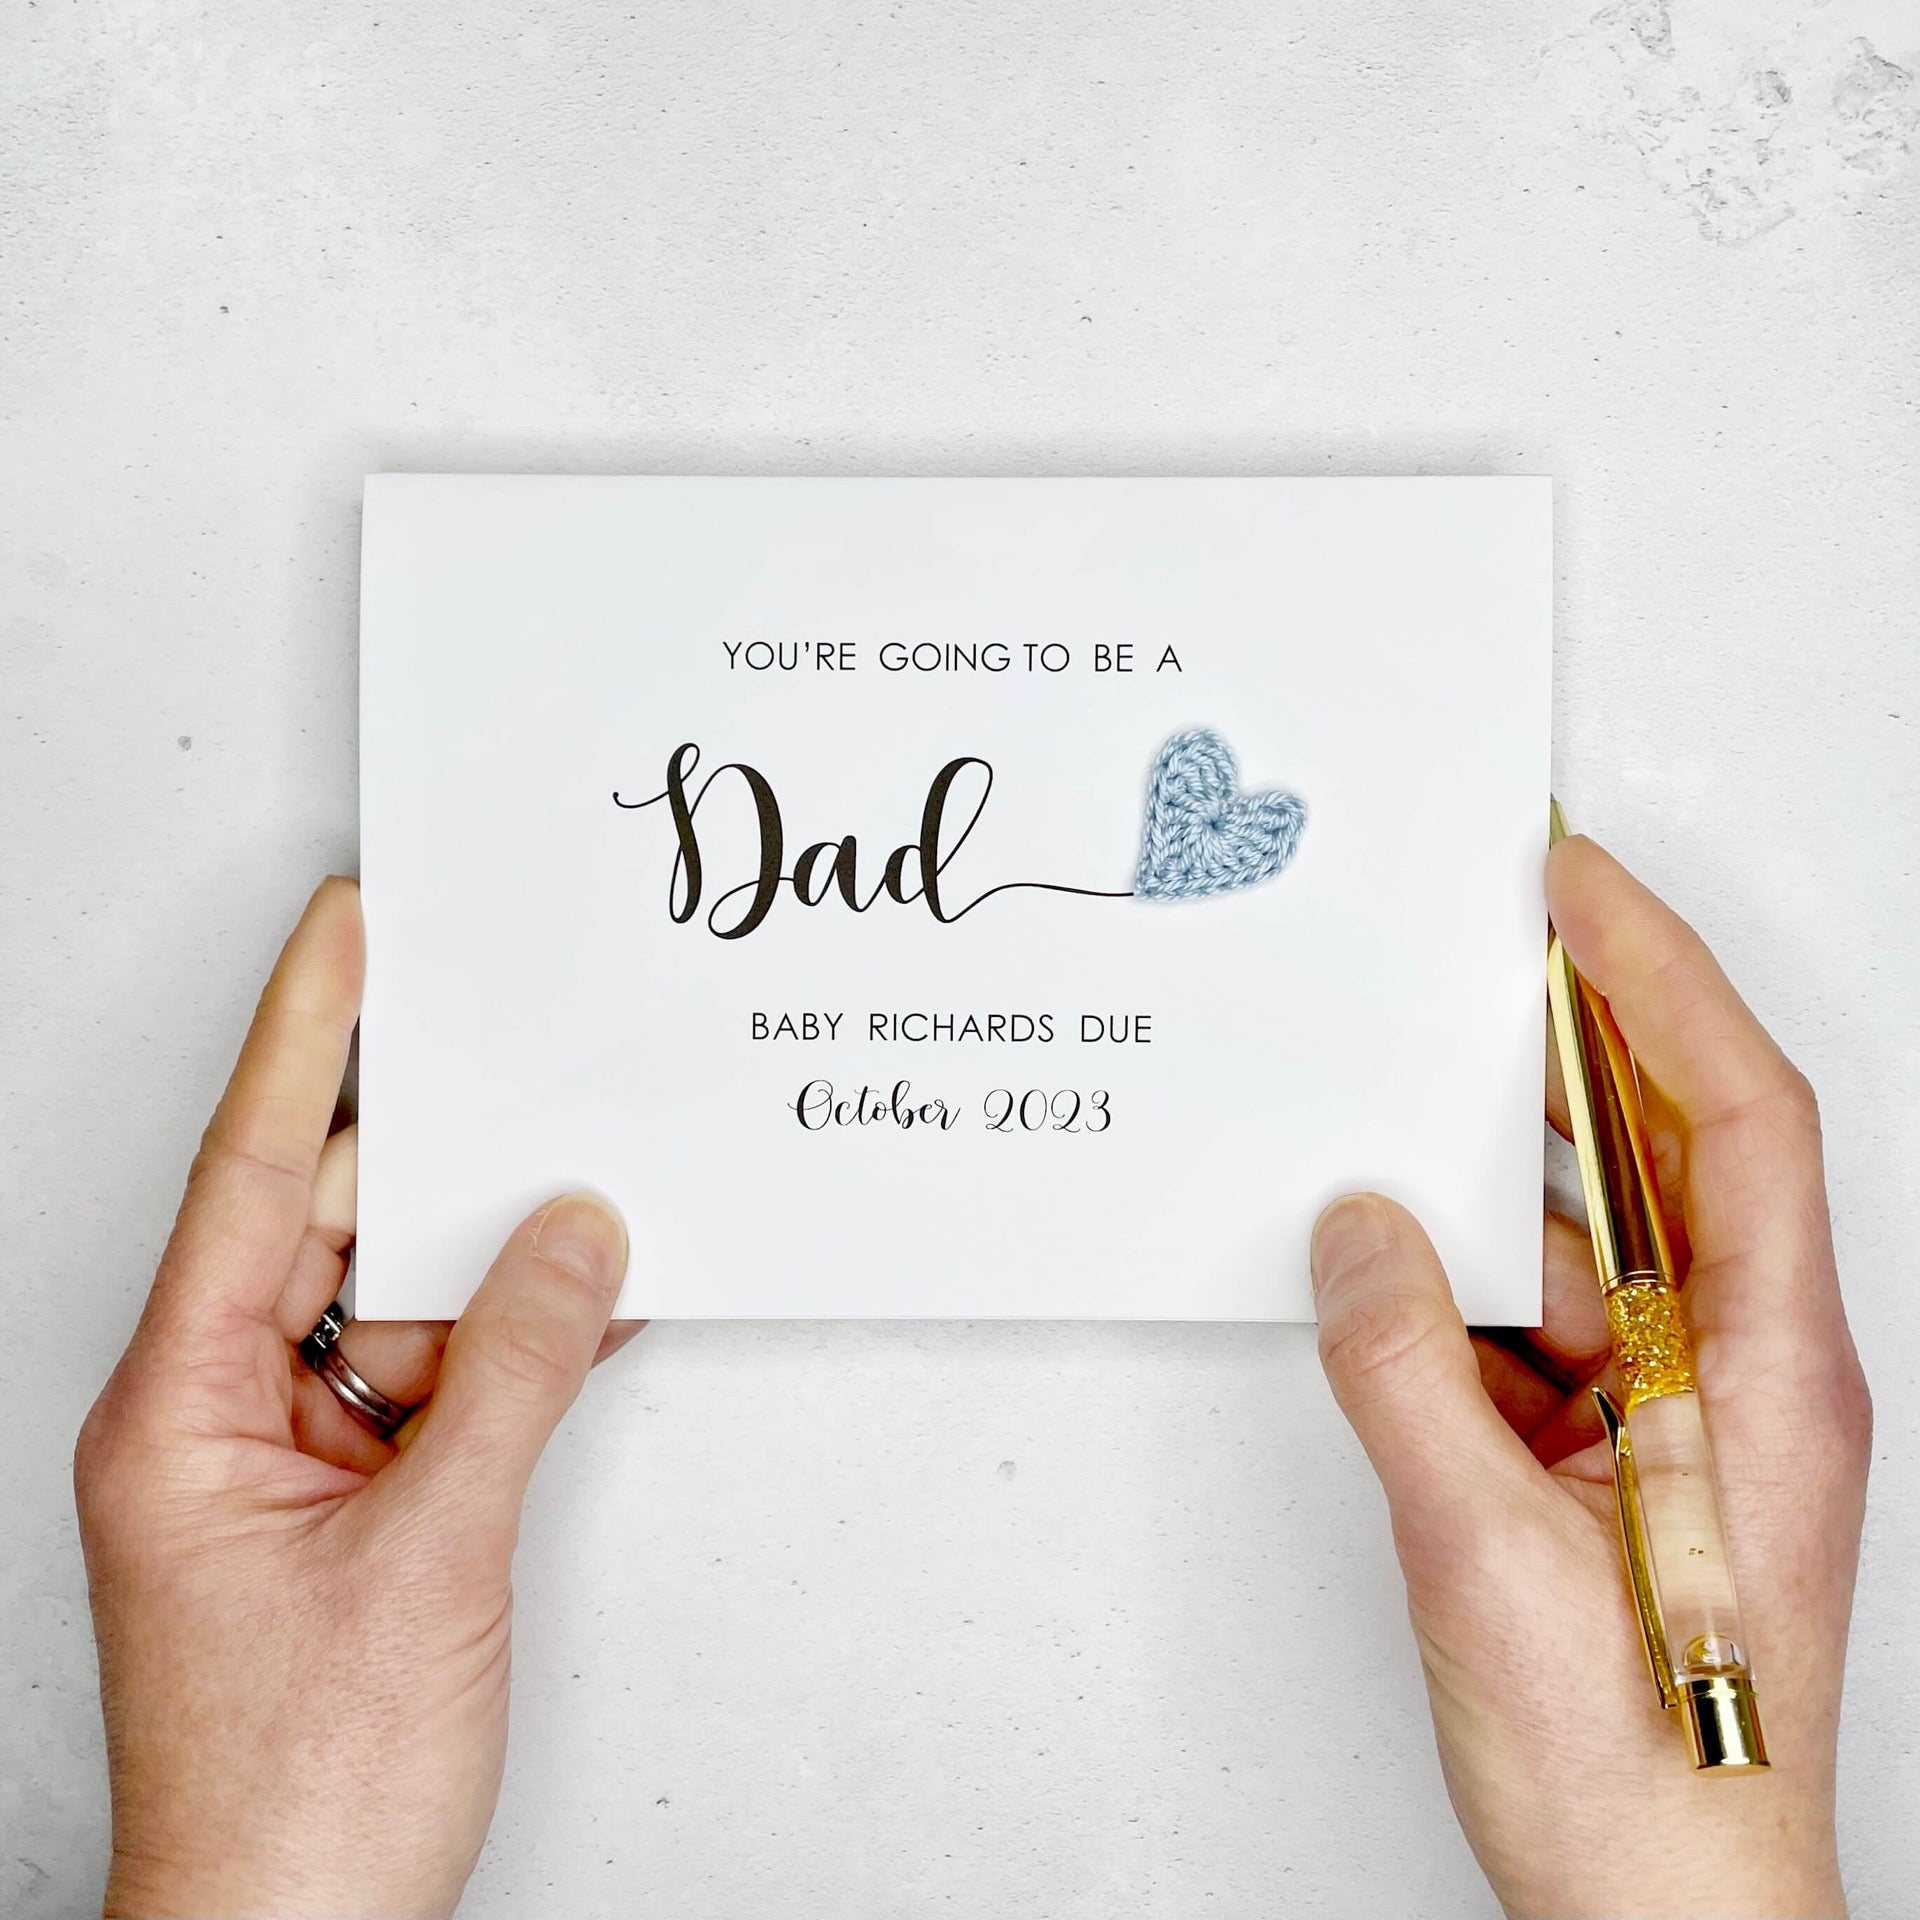 You're going to be a Dad card